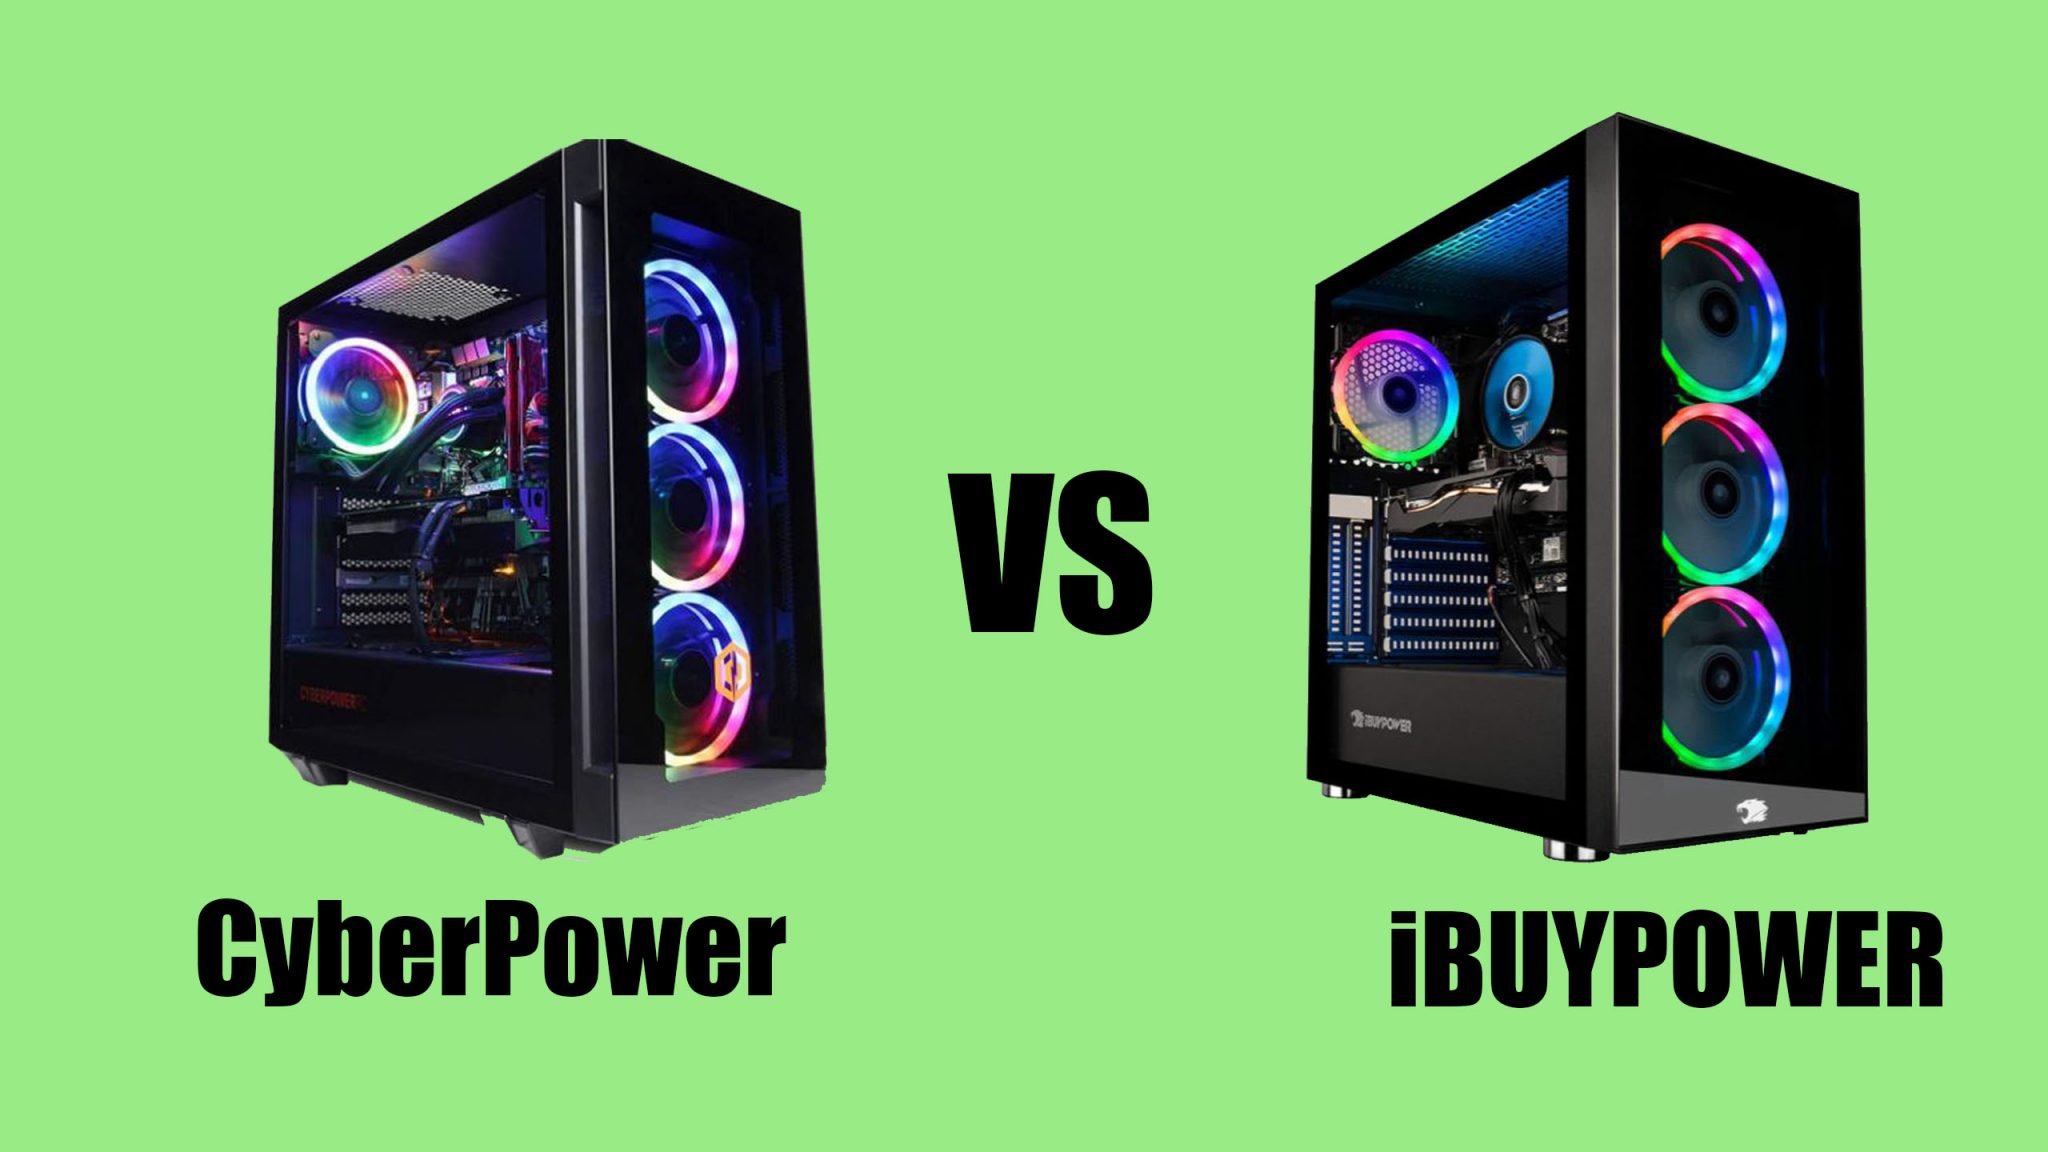 CyberPower VS iBUYPOWER Who Builds the Best Computer?